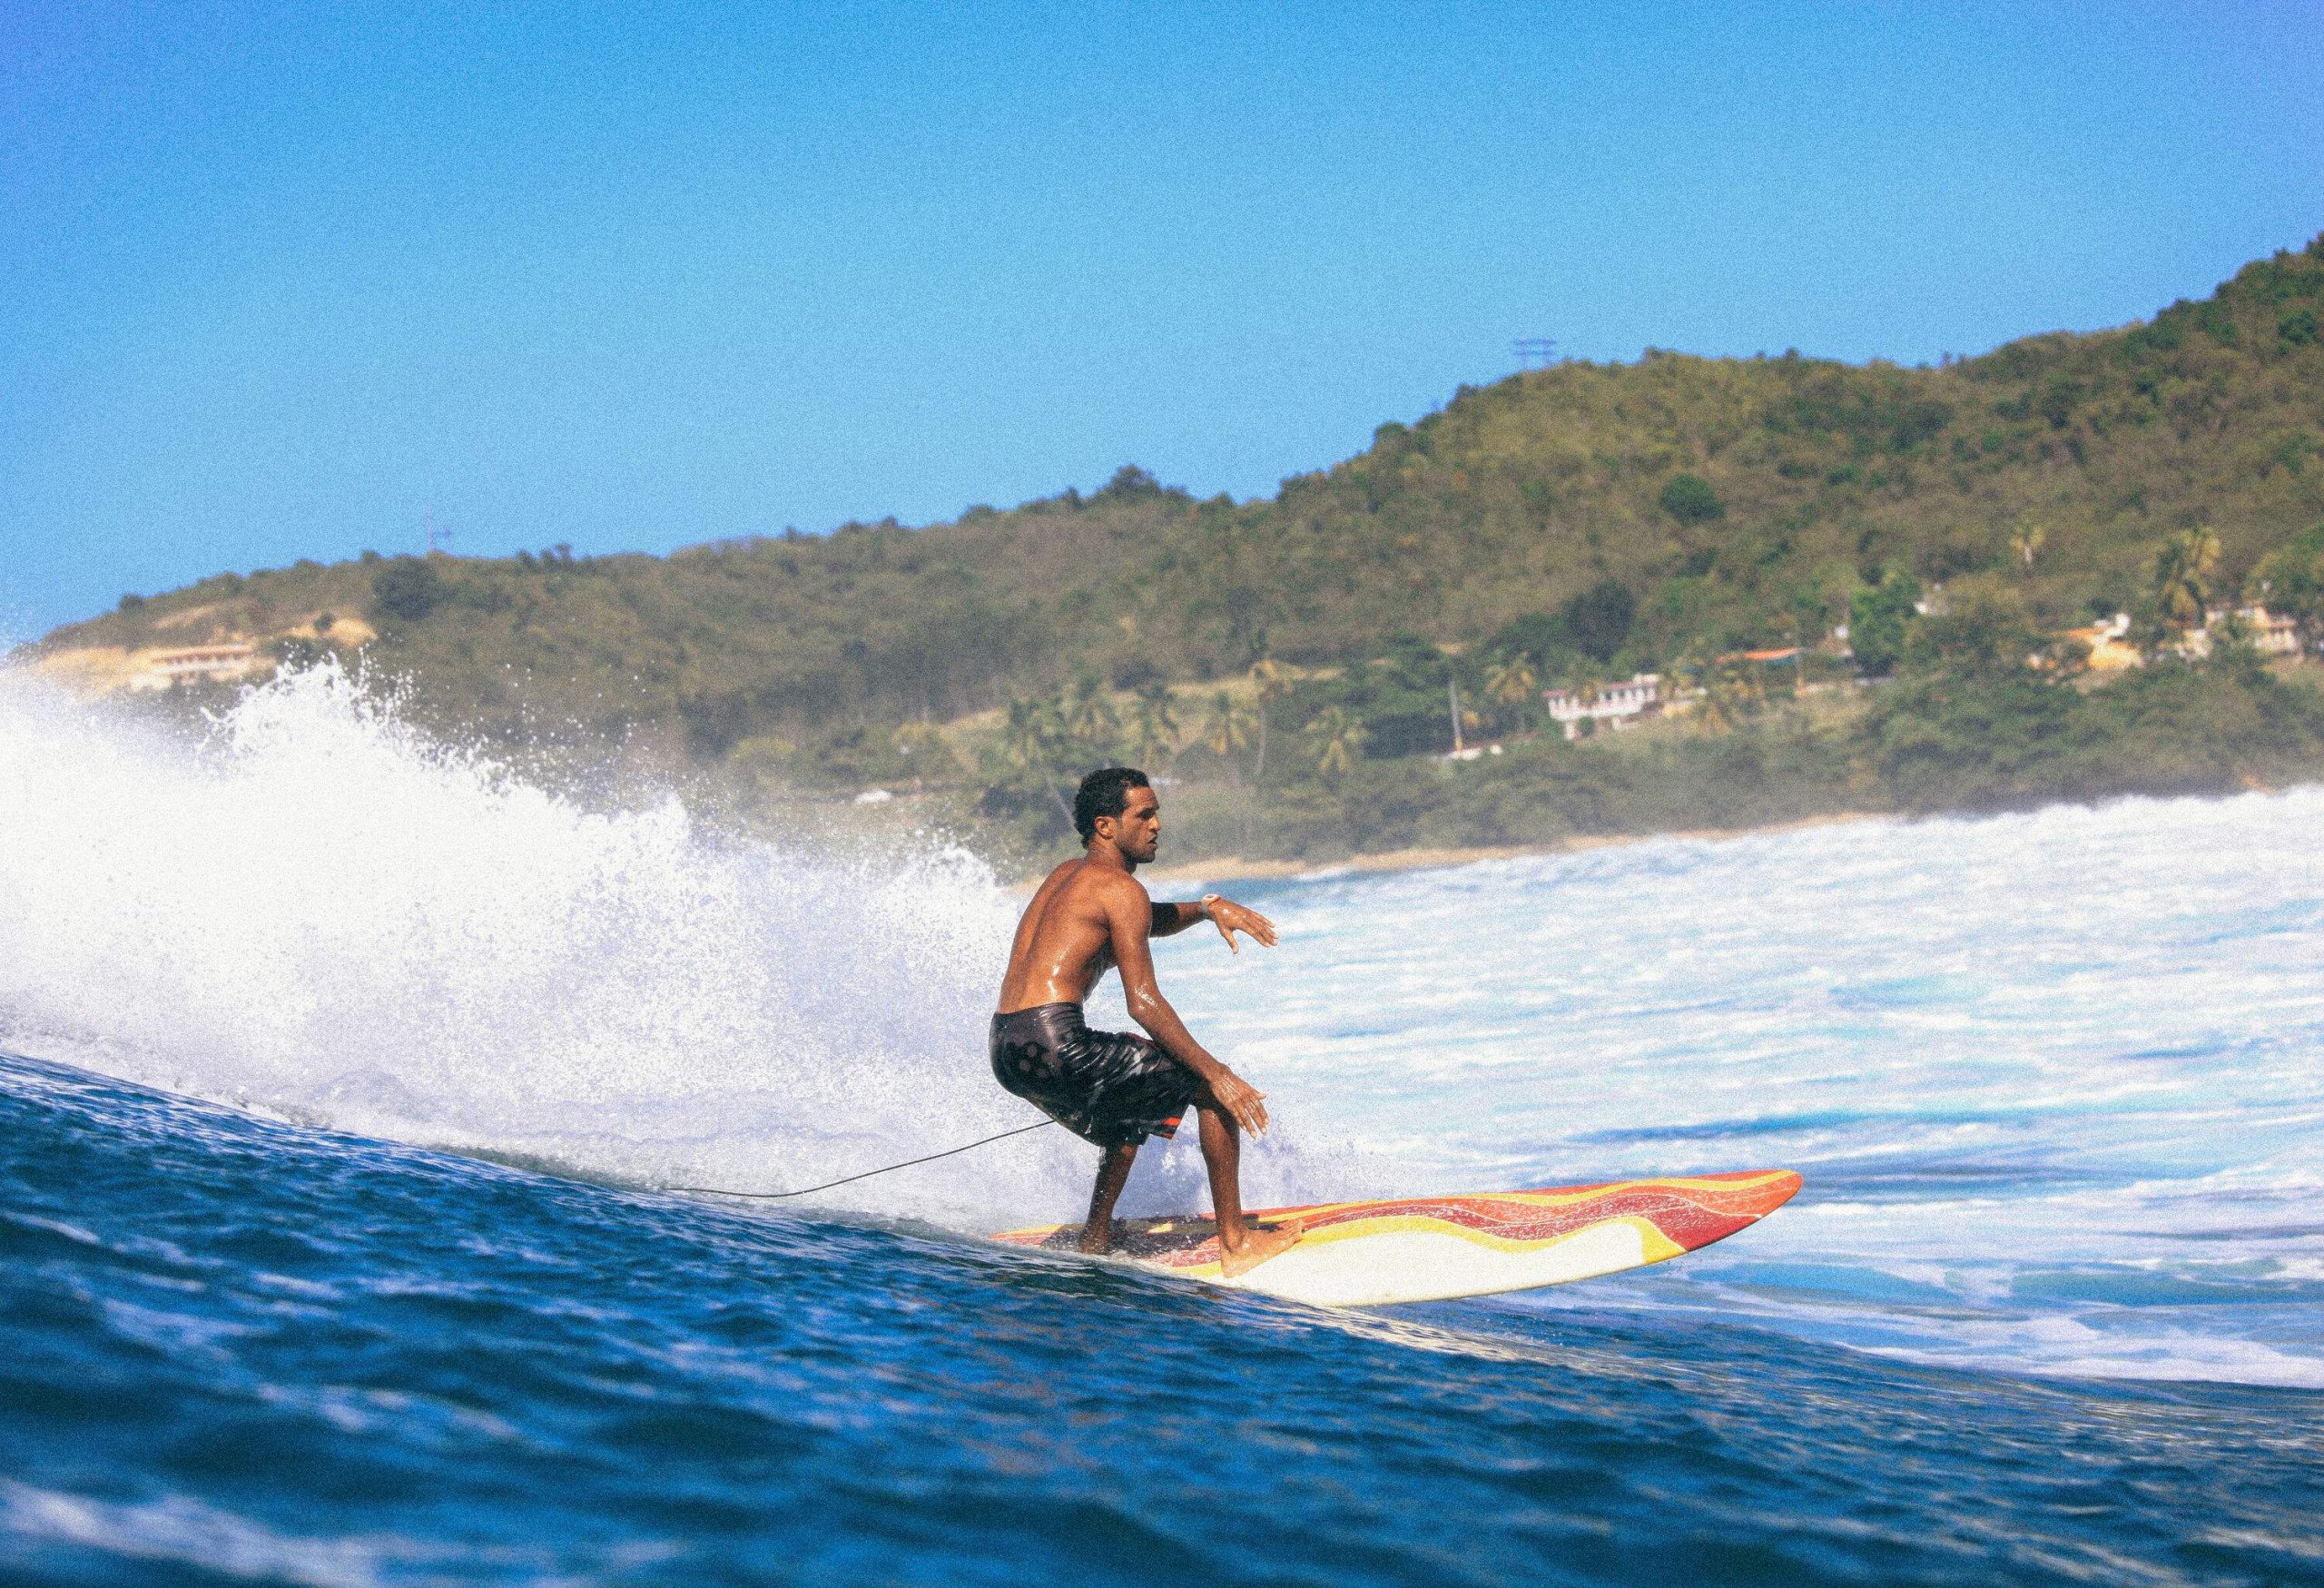 A man skillfully surfs on the wavy beach by the lush island.